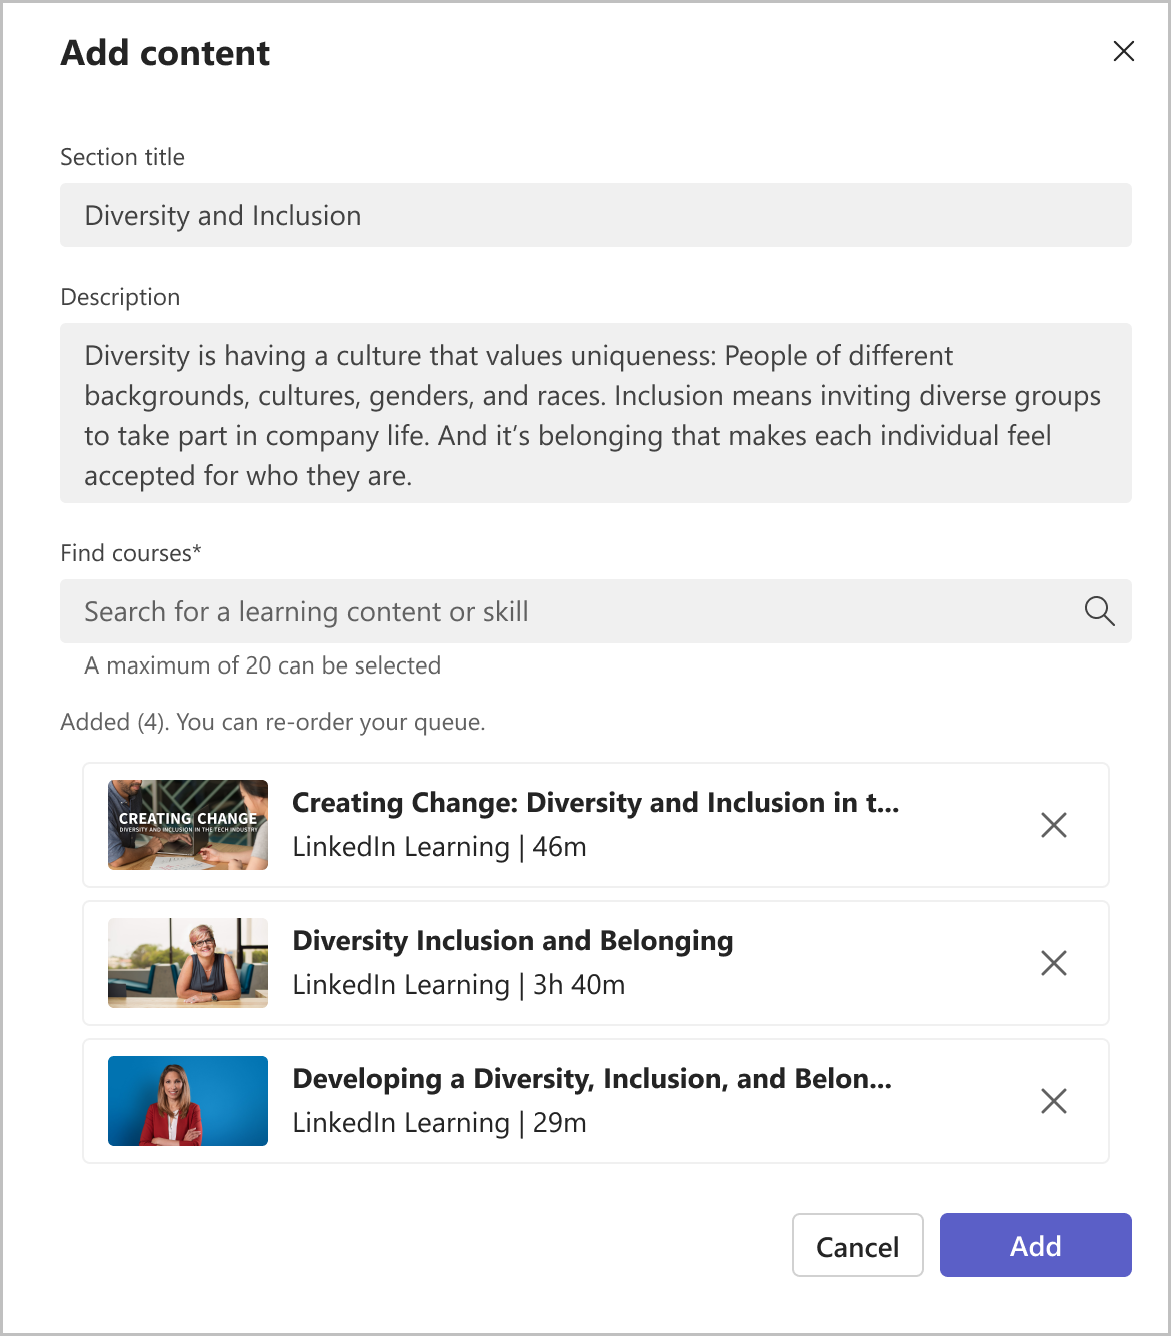 Image of add content view with section title, description, and search view for finding courses.